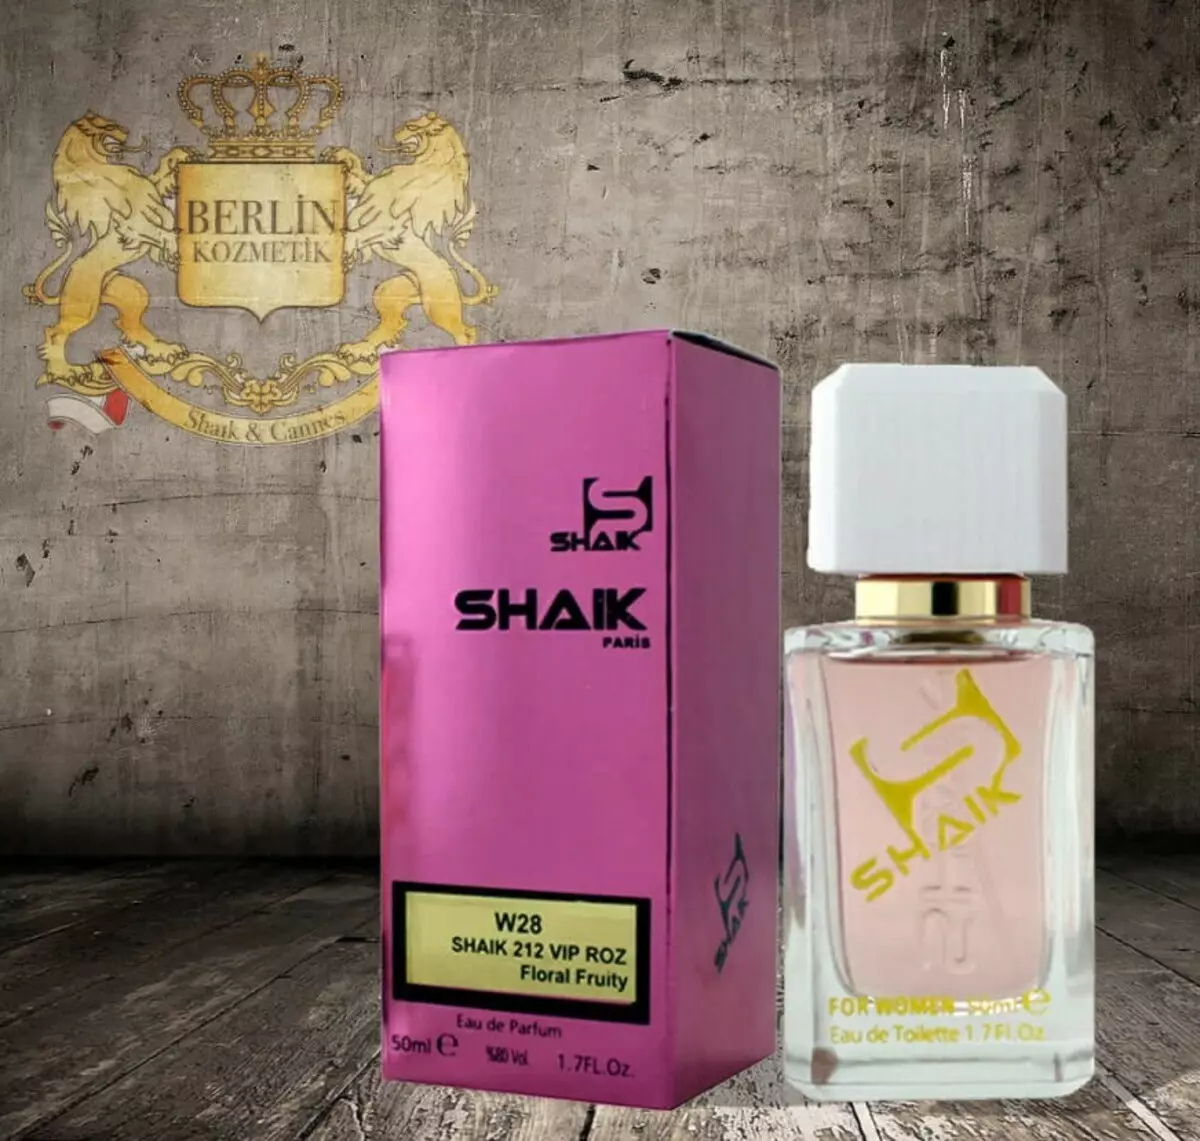 Turkish perfumes: perfume and cologne, colonid, toilet water and other perfumes from Turkey, overview of fragrances for men and women 23398_16